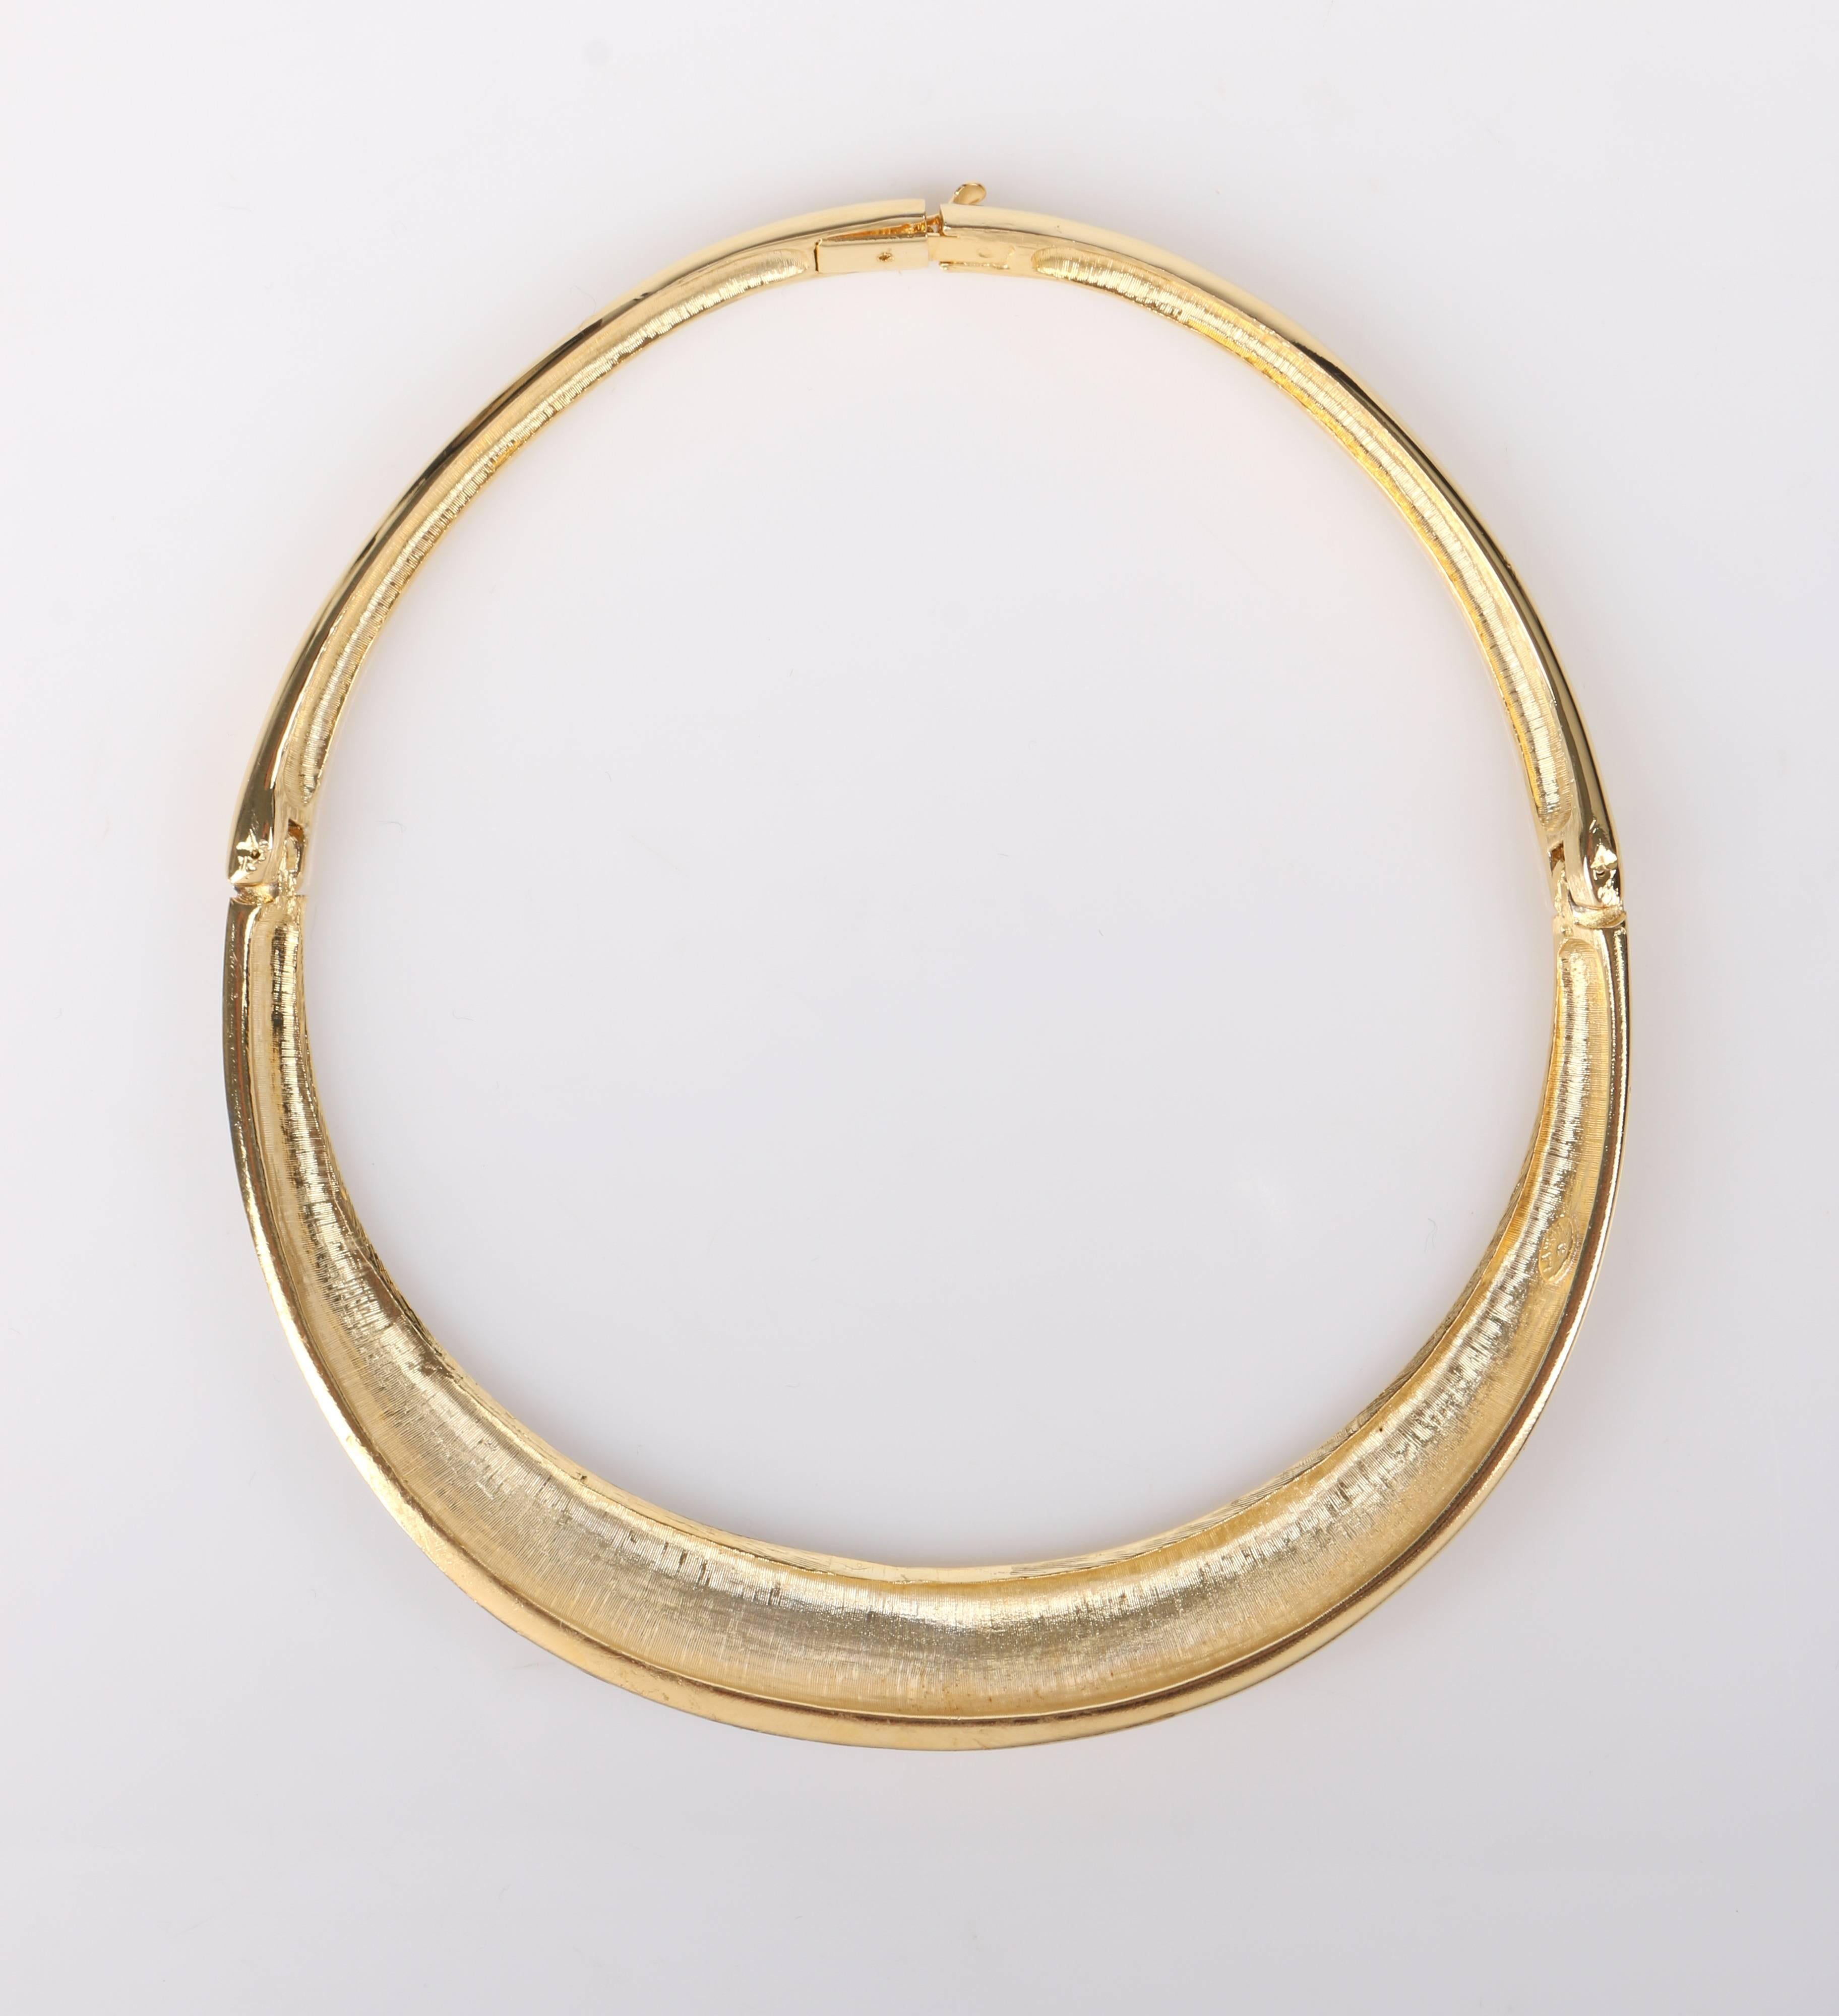 Vintage Lanvin c.1970's gold-toned metal and crystal rhinestone modernist collar choker necklace. Designed by Jules-François Crahay. Polished gold-toned collar has silver crystal rhinestone segment at left front. Segment is separated at the middle